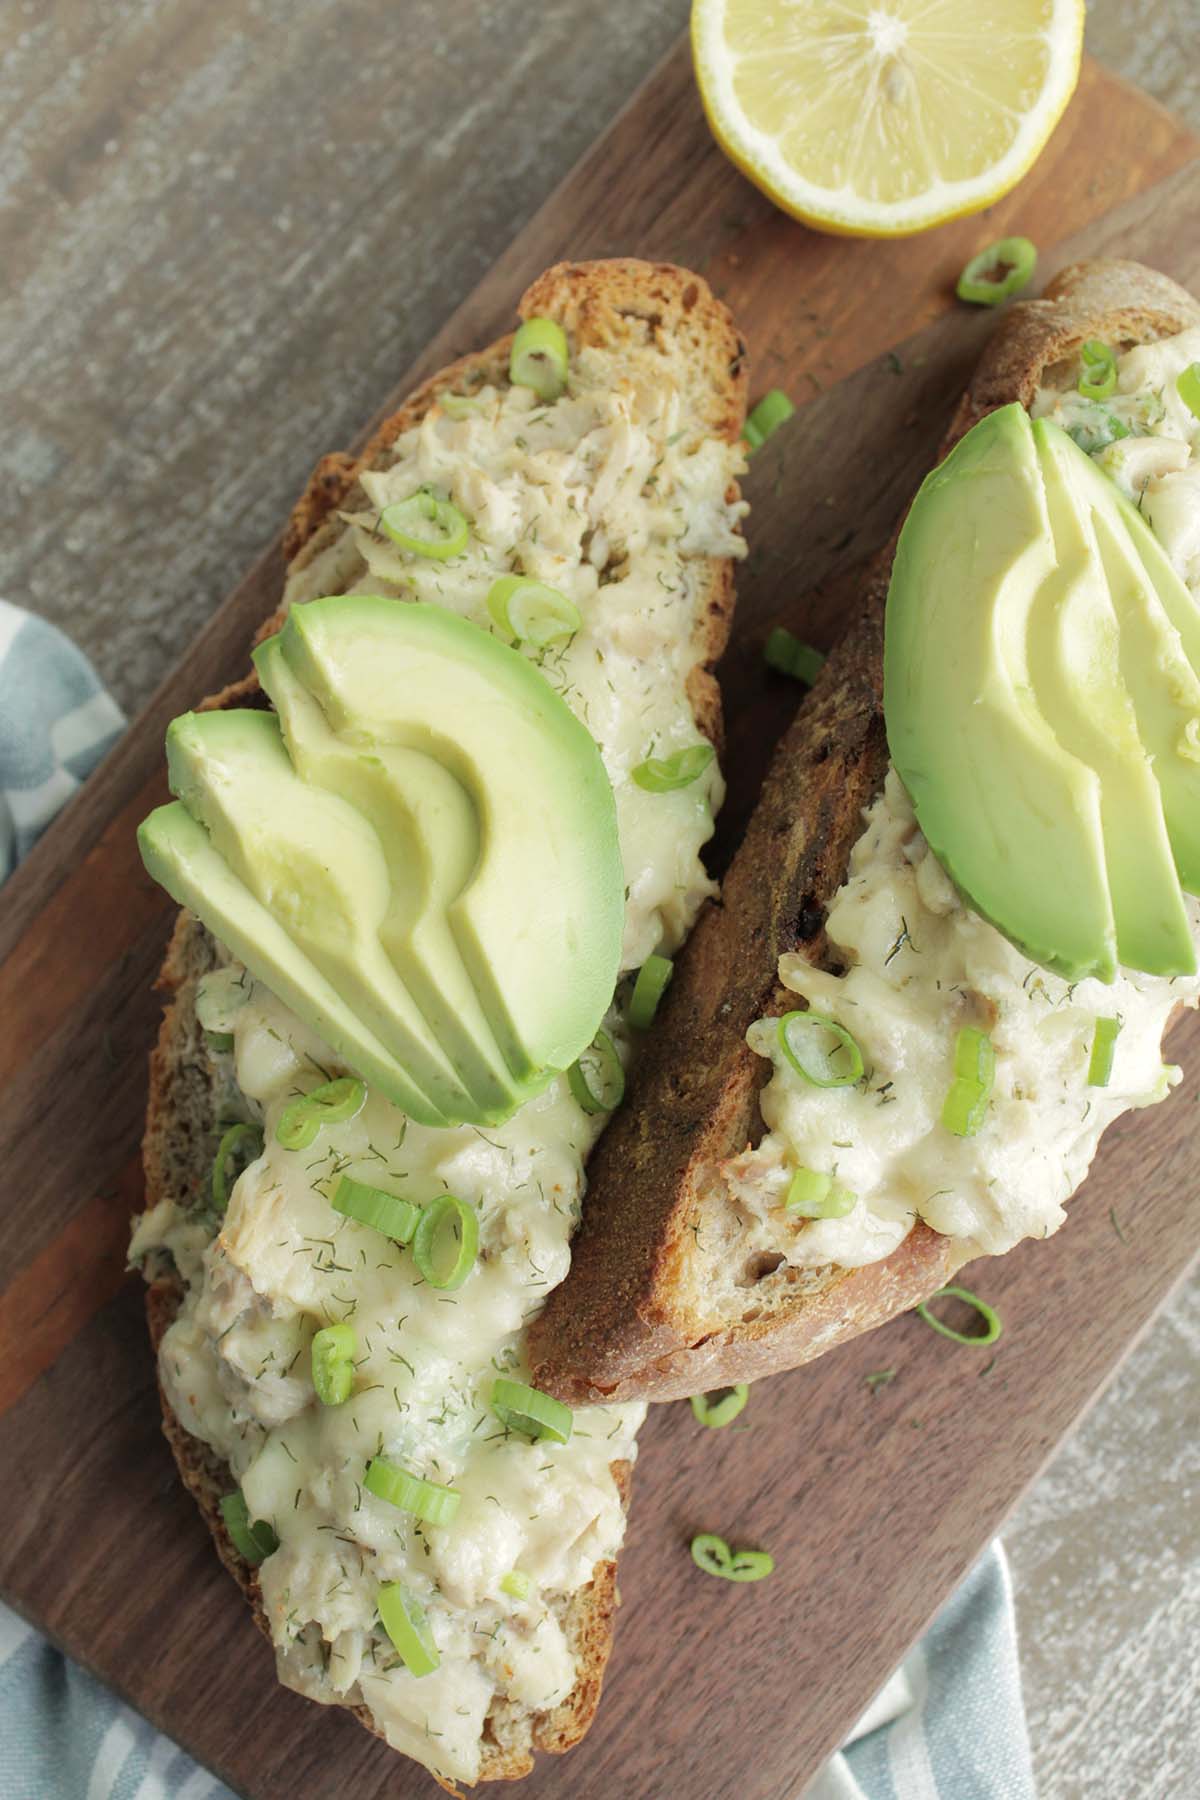 California tuna melt turns pantry essentials (canned tuna) into a fresh & warm open faced sandwich. Made with Greek yogurt & a touch of mayo, all topped with Havarti cheese!